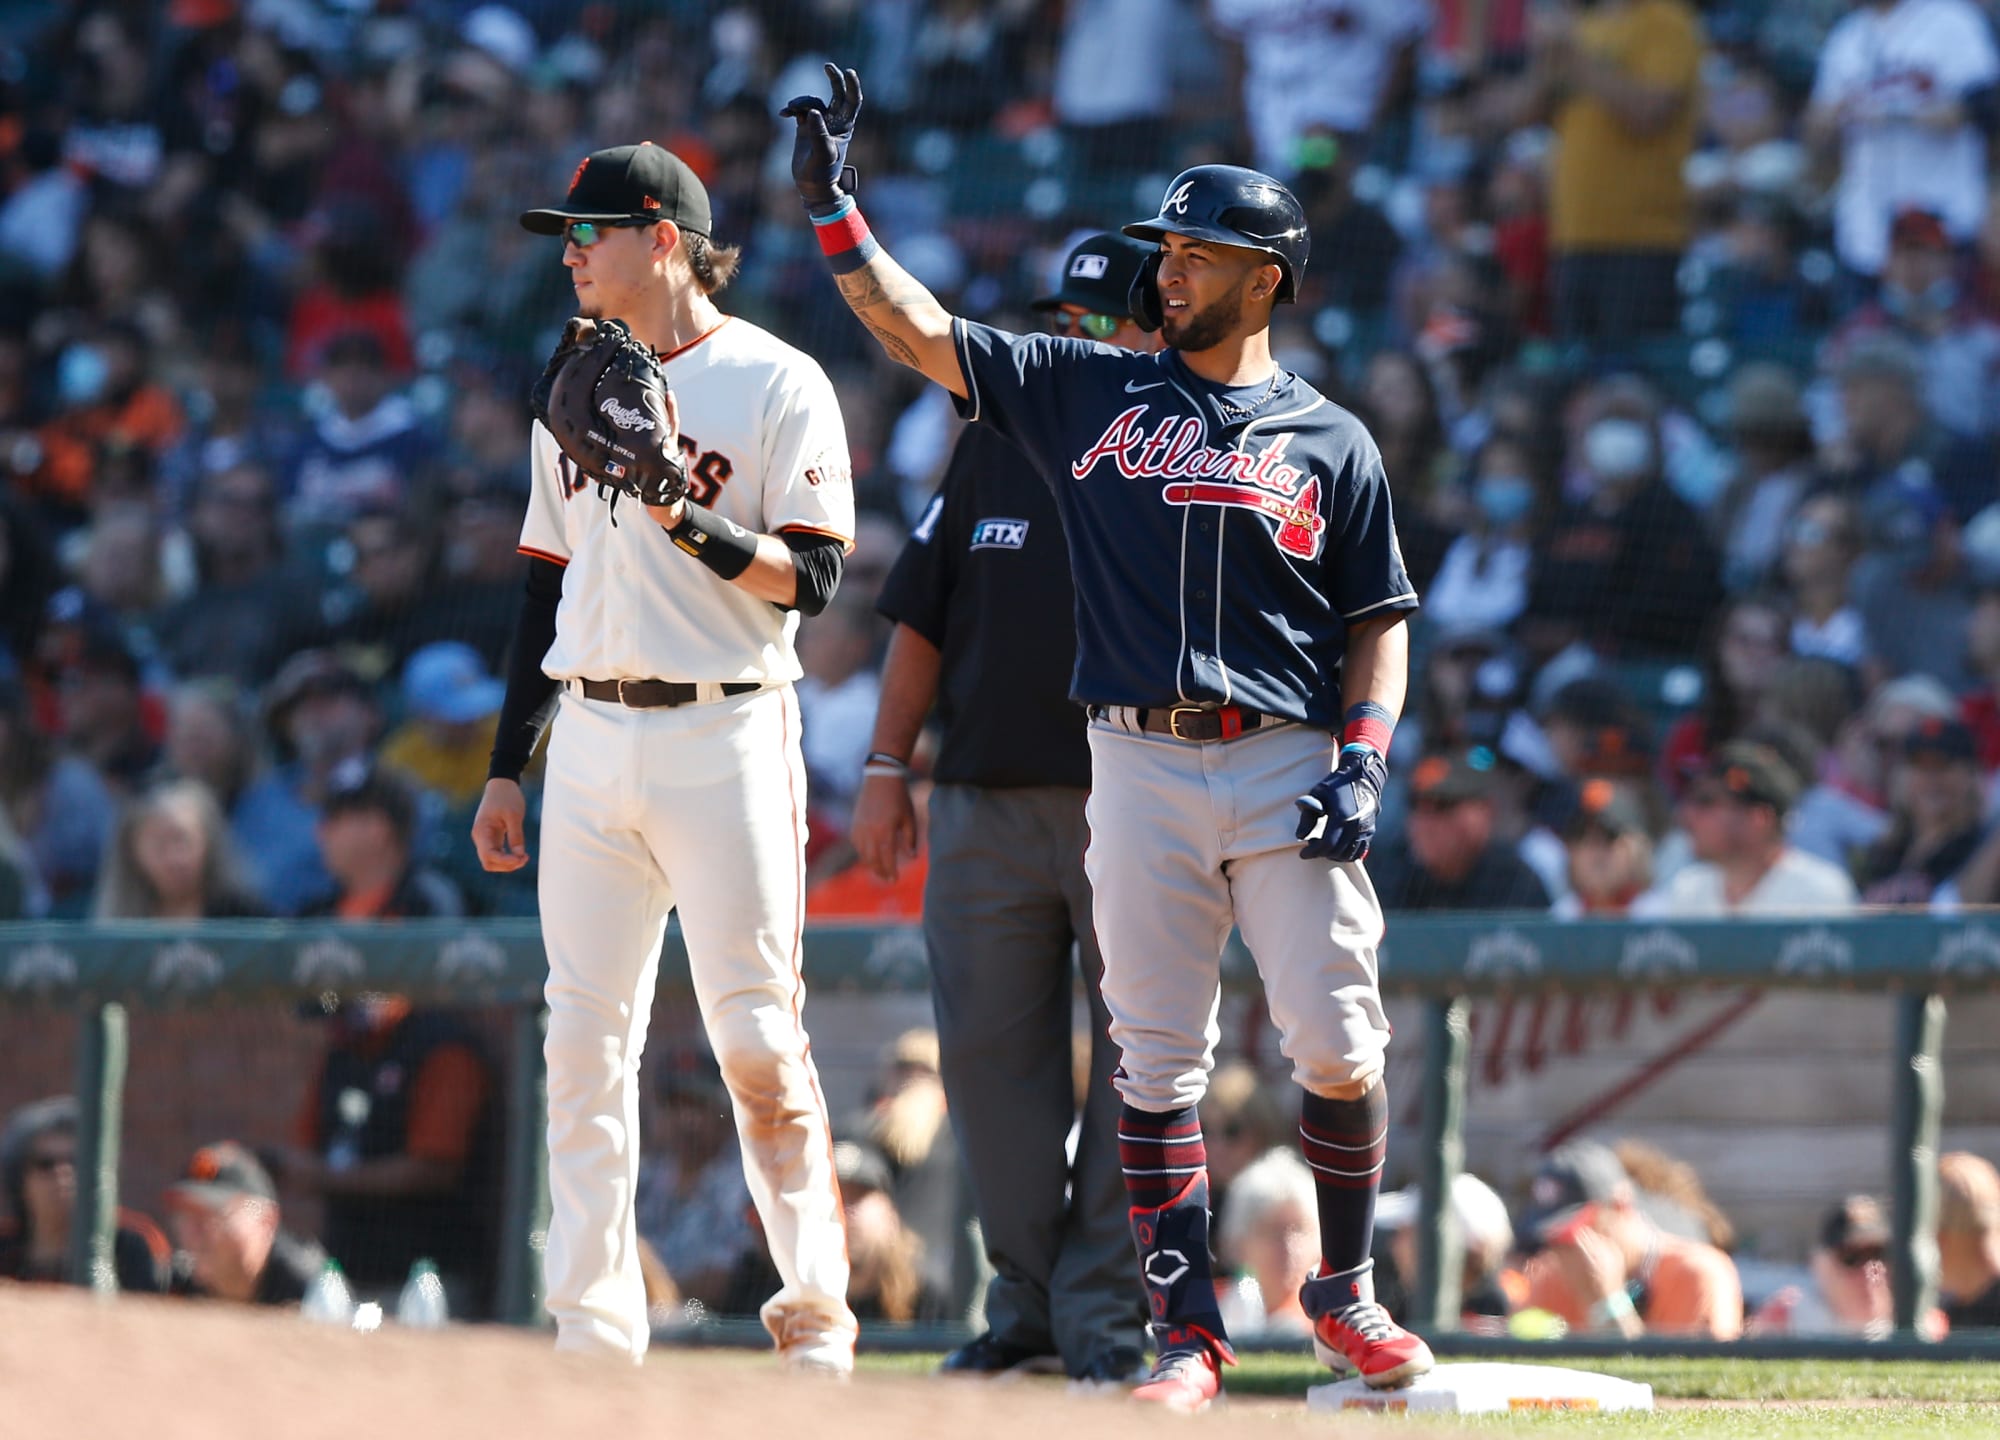 Braves: Time to Finish Final Road Trip of 2021 with a Bang